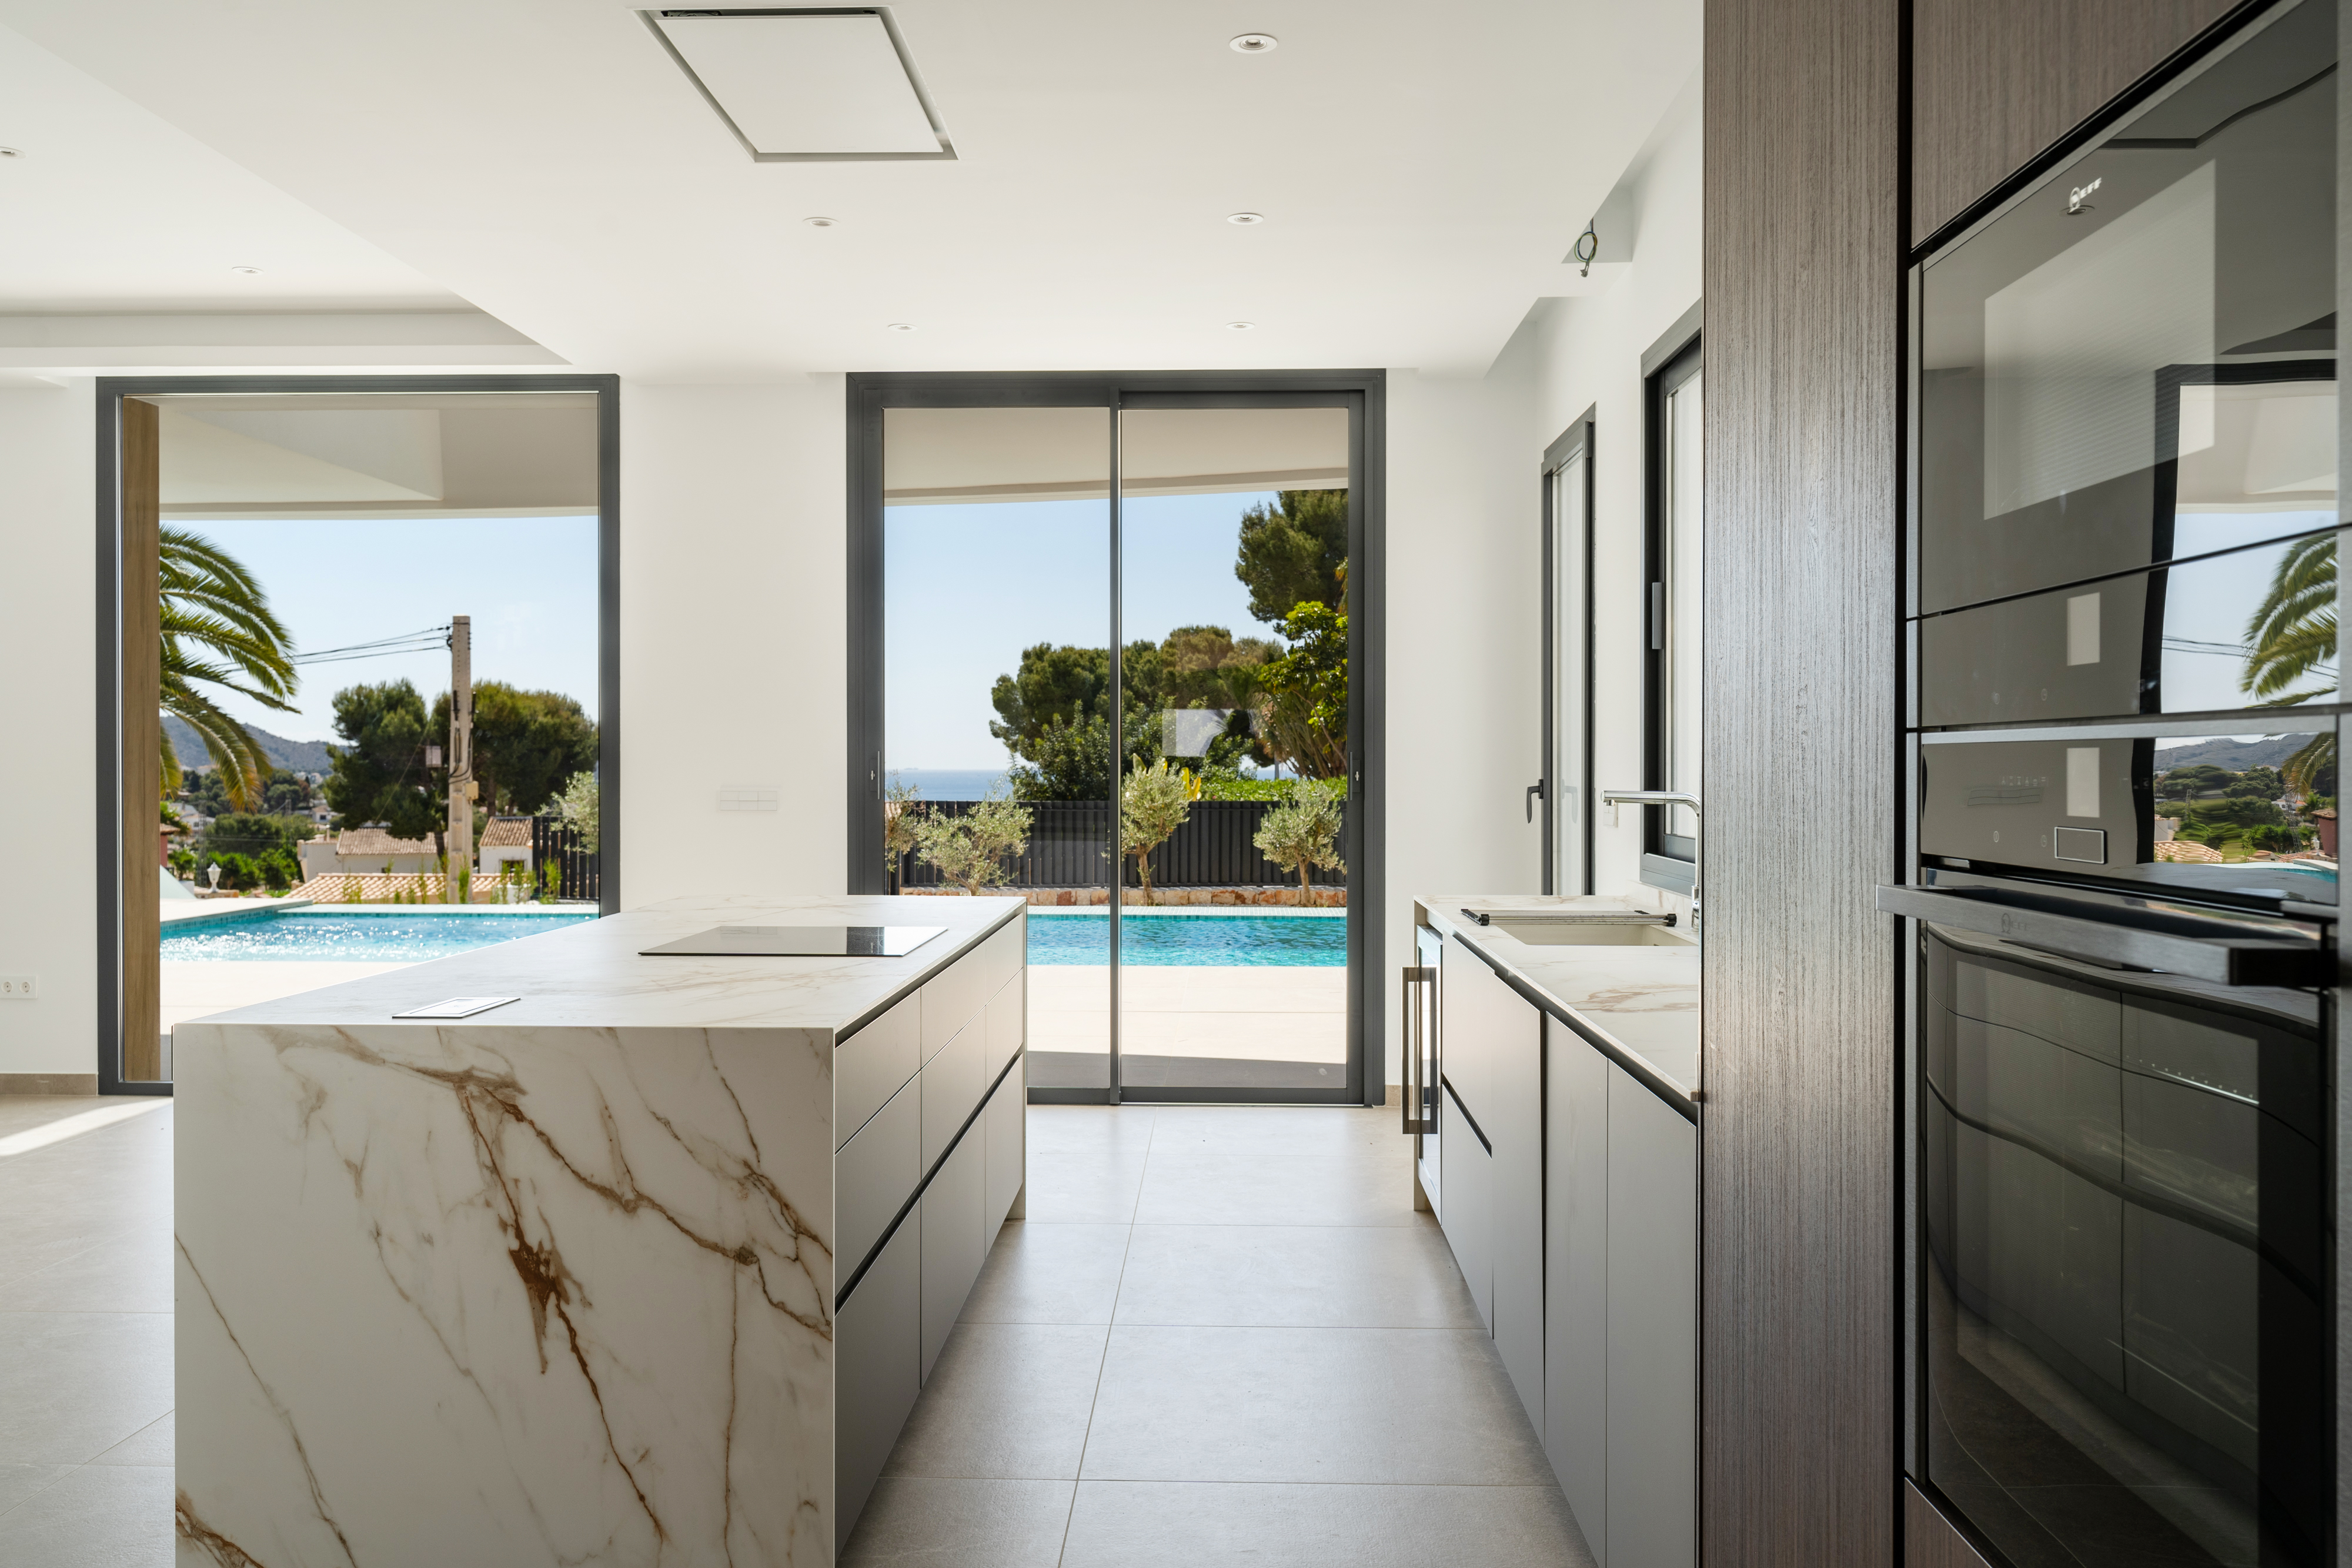 IN MORAIRA WE FIND THIS SPACIOUS AND MODERN VILLA WITH SEA VIEWS